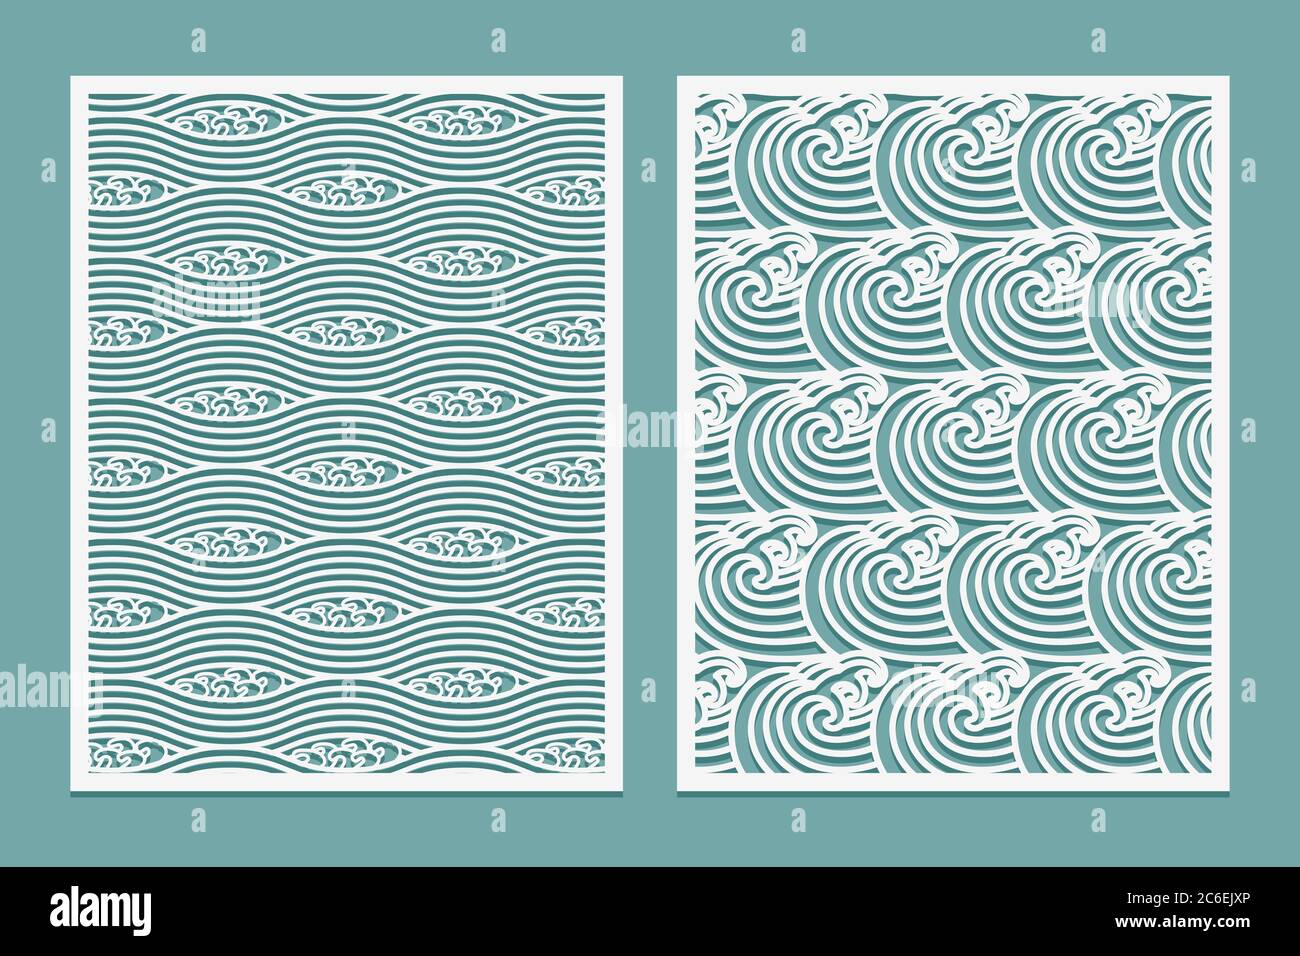 Set of Laser cut template pattern Rivers waves Asian style scenery Metal cutting or wood carving, panel design, stencil for fretwork, paper art, card Stock Vector